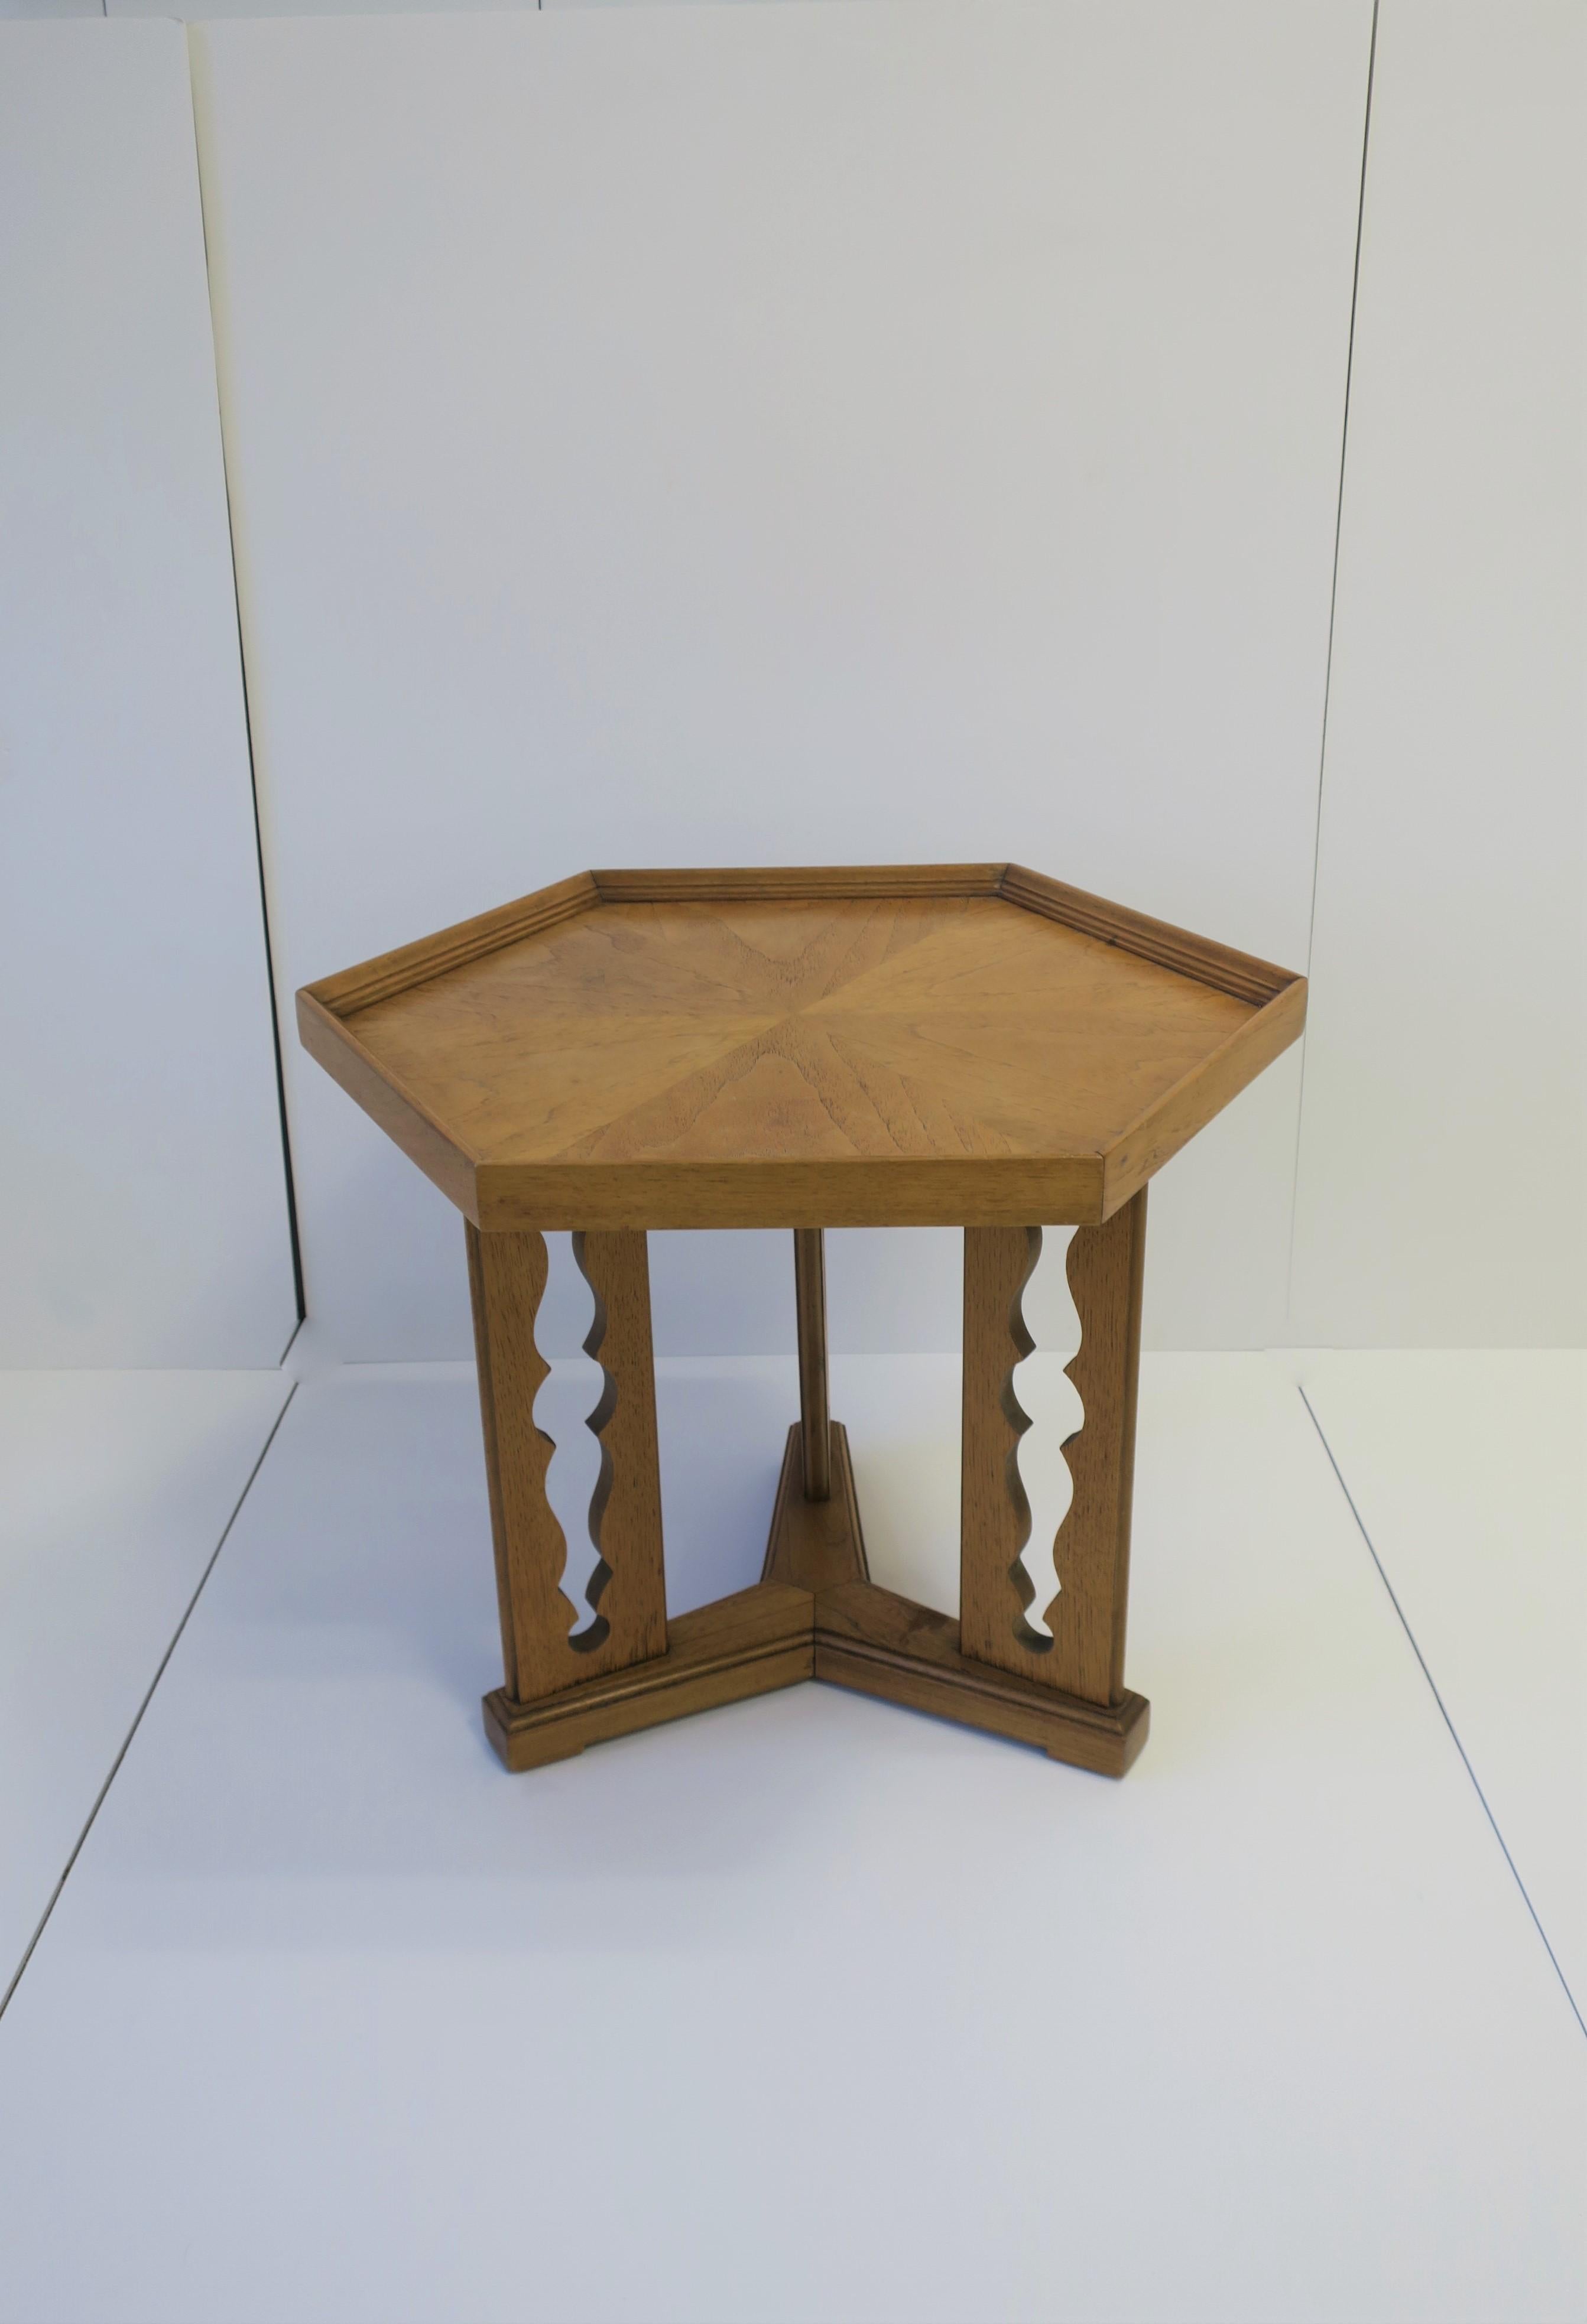 A hexagon top wood side or end table 'Esperanto' by Drexel with decorative base. The hexagon shape tabletop is a nice alternative to round, and 'cut-out' base adds a nice decorative element. Hue is a medium 'blonde' as show in images. Maker's mark